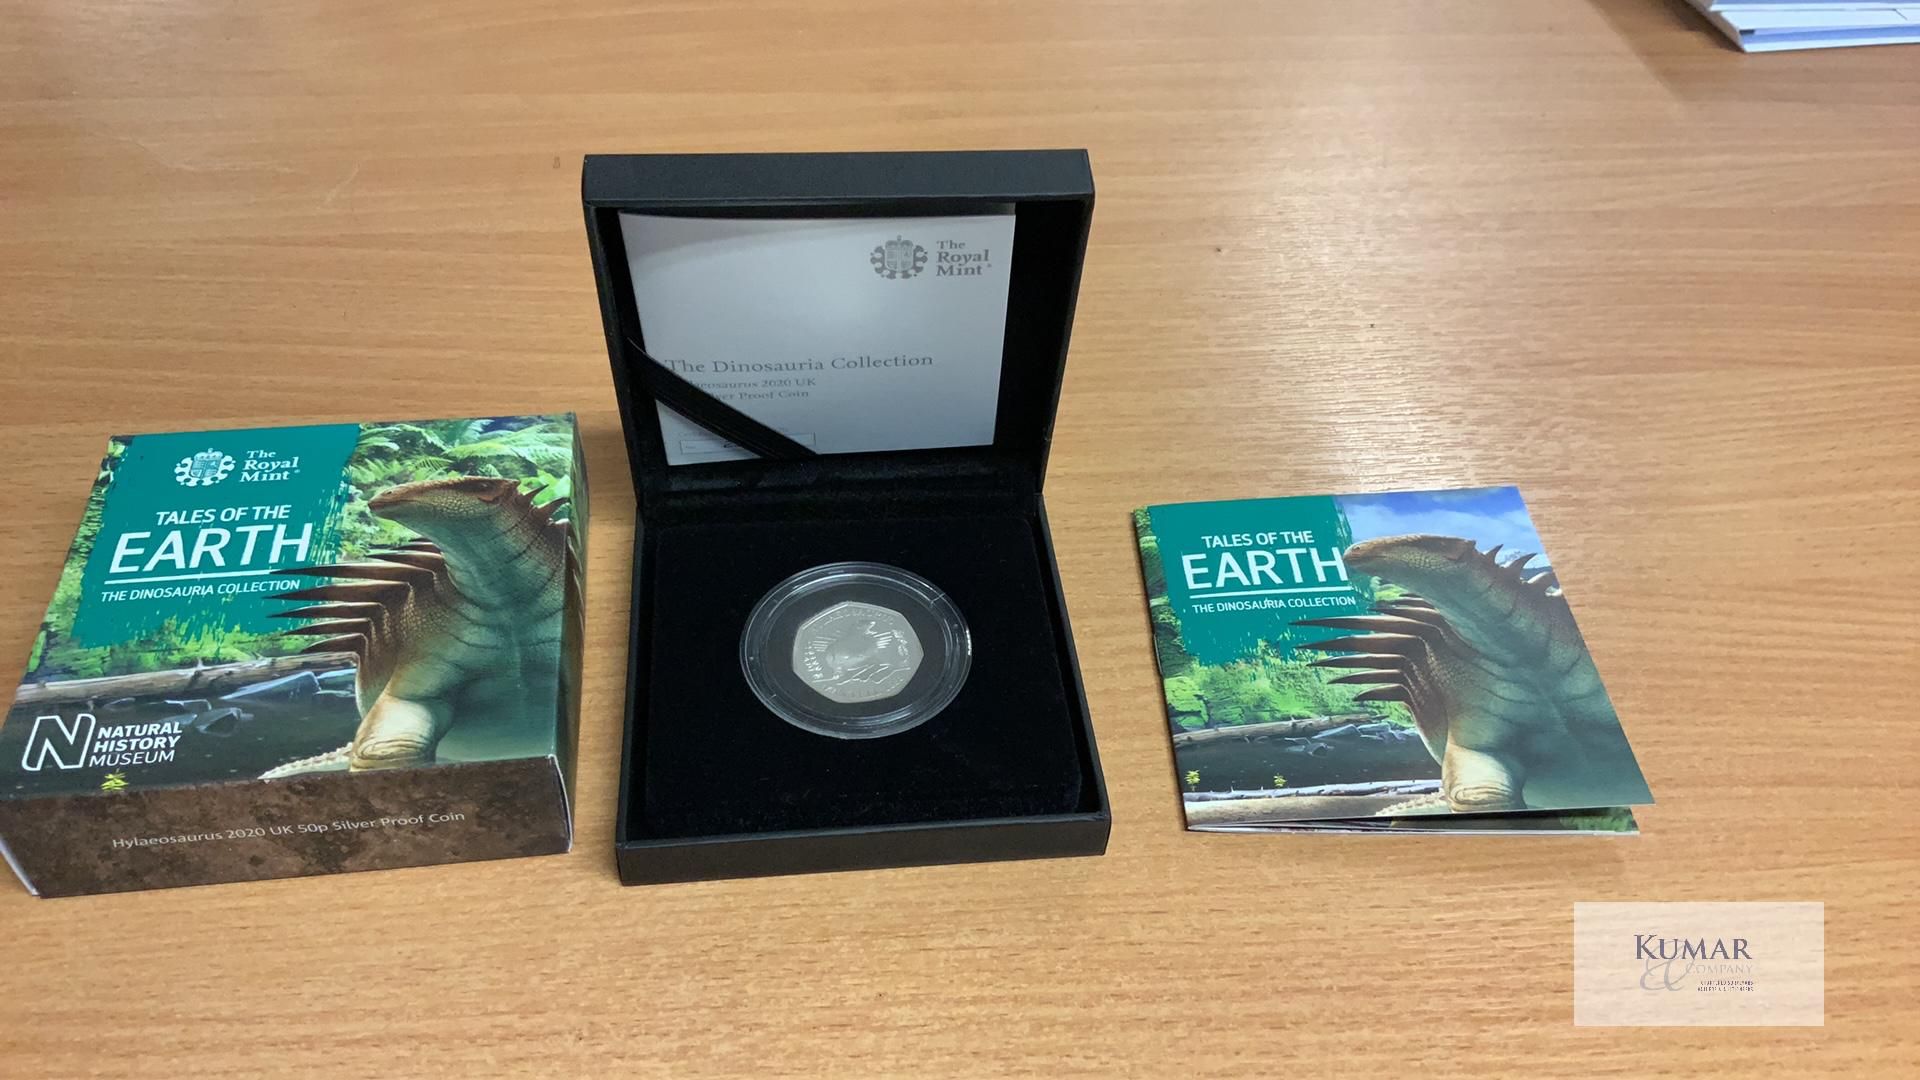 The Royal Mint Coin- Tales of the Earth - The Dinosauria Collection Hylaeosaurus 2020 UK 50p - Bild 2 aus 4